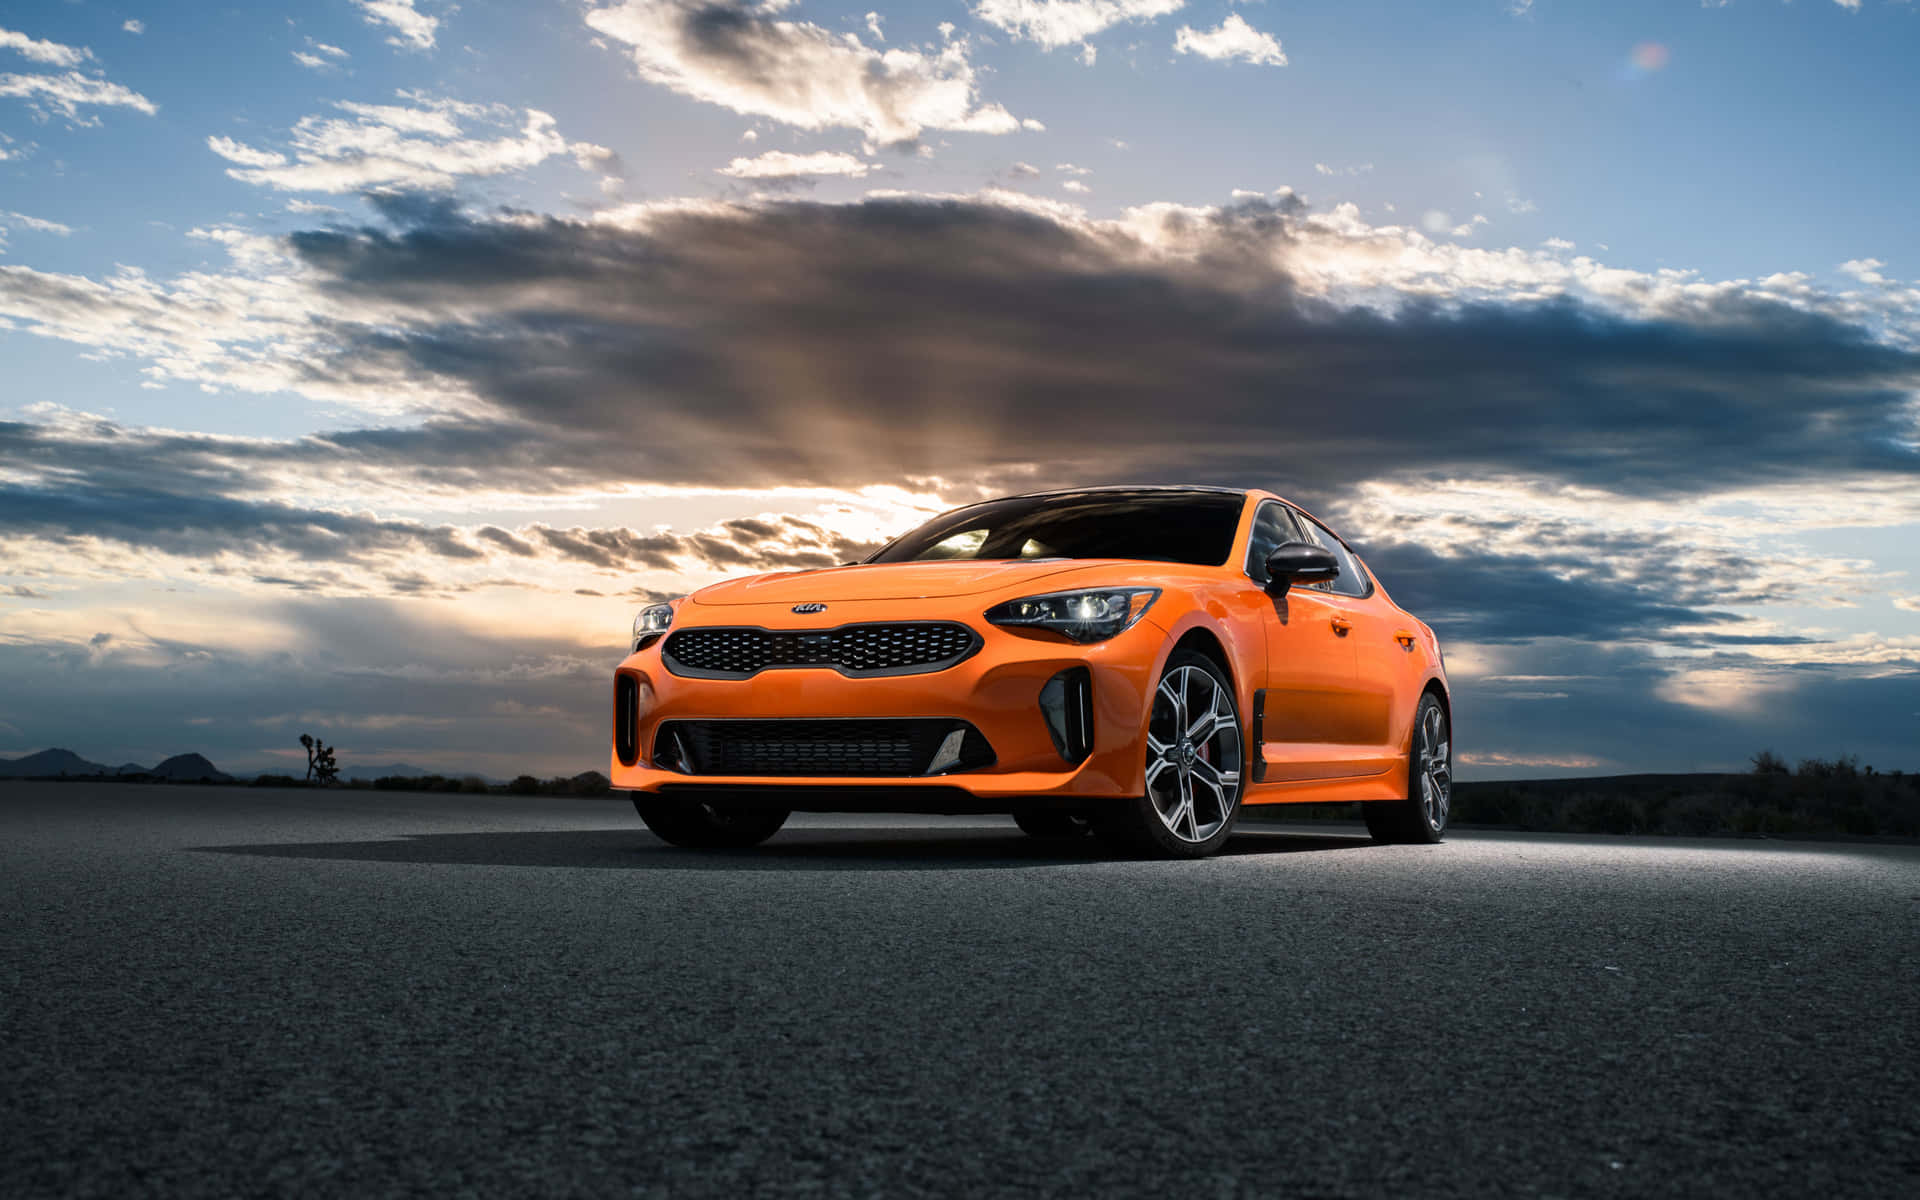 Stunning Kia Stinger in action on the road Wallpaper